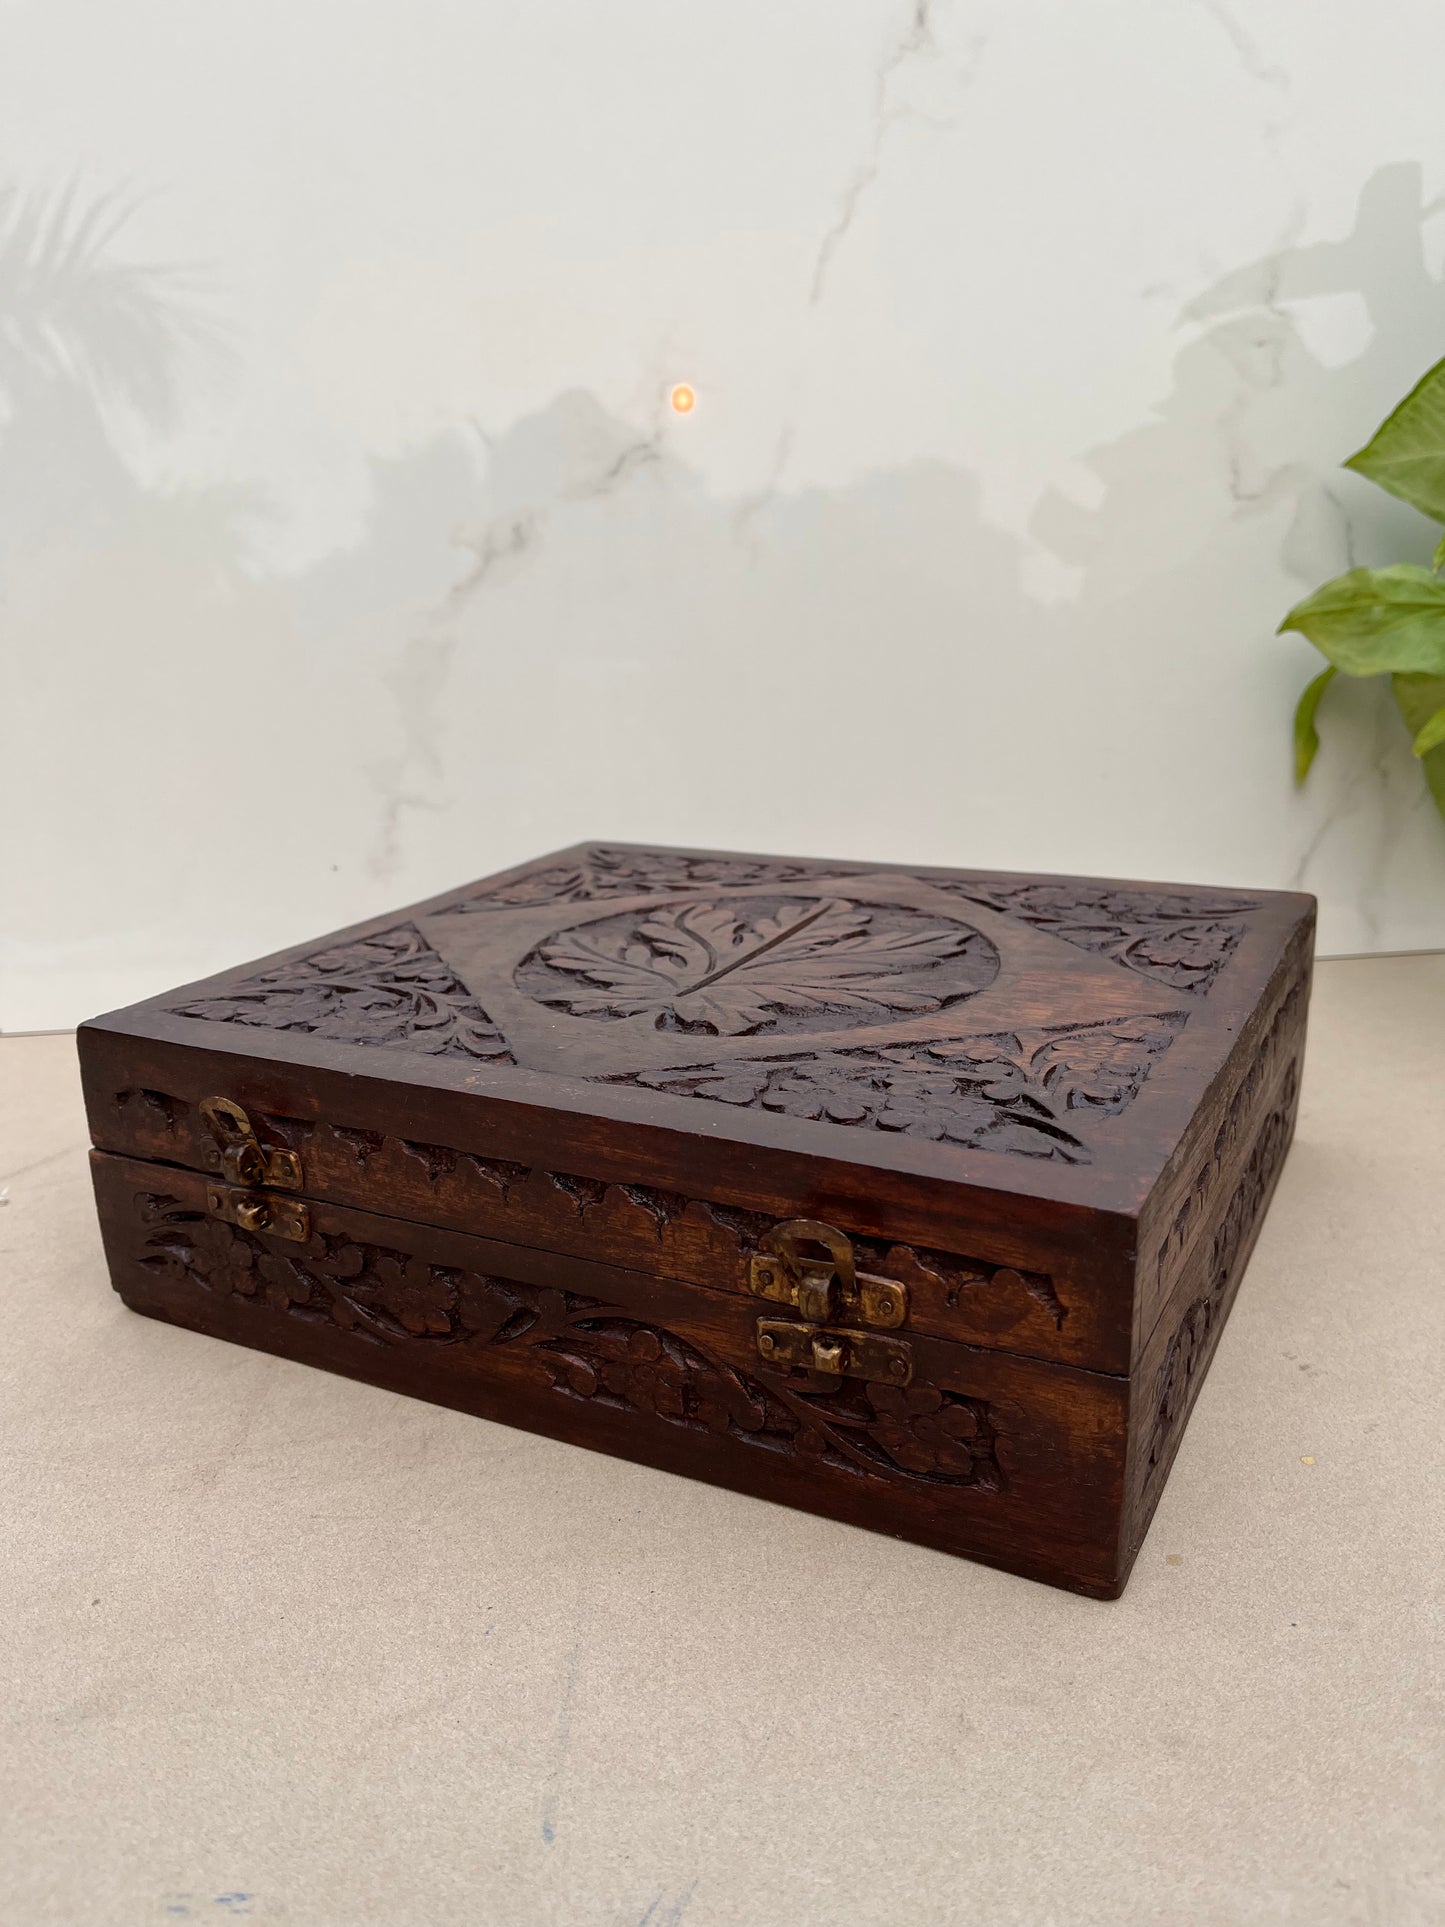 Wooden Carving Square Box